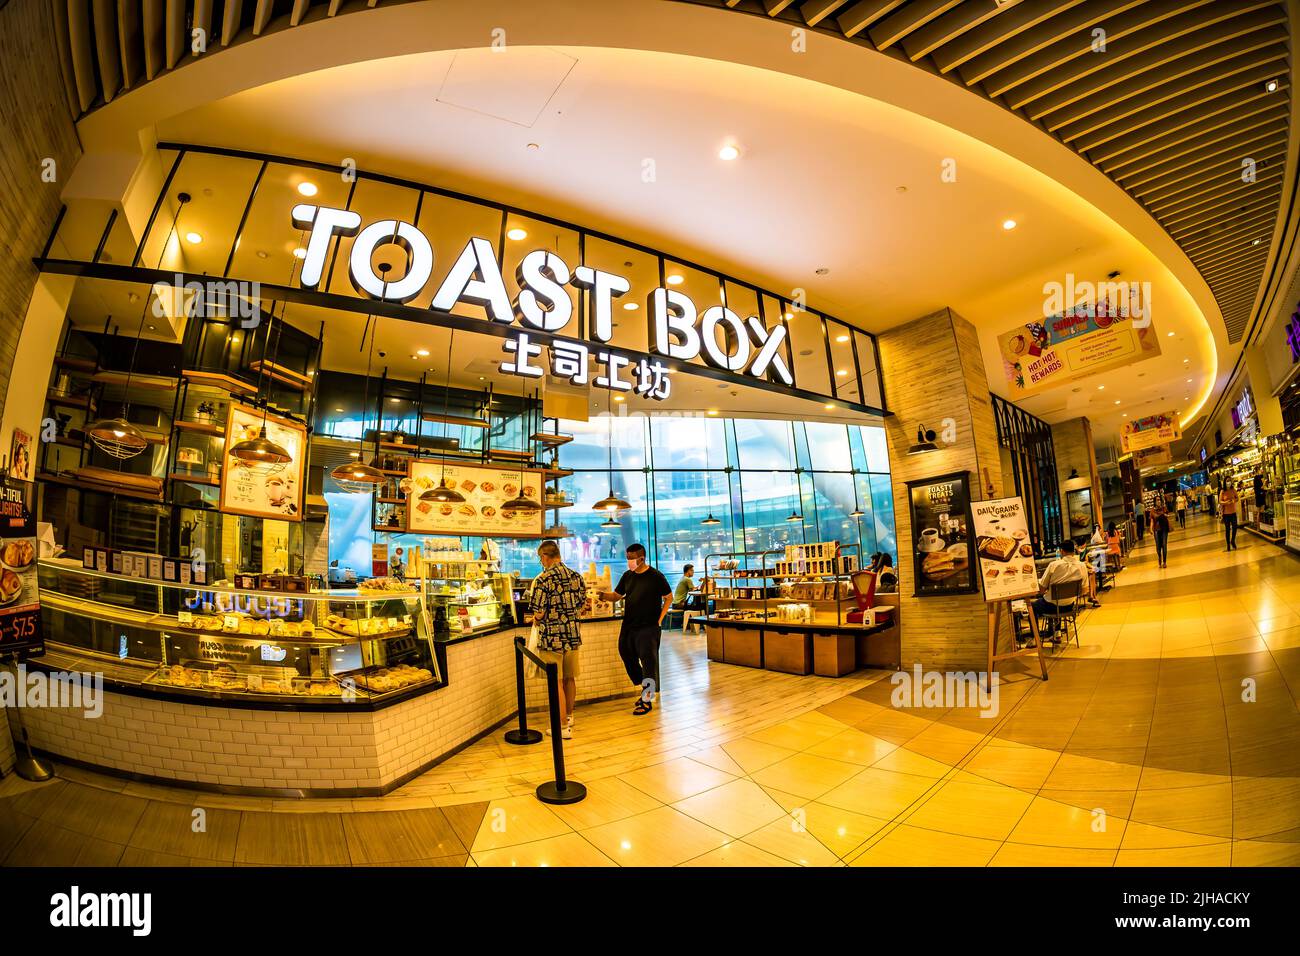 Toast Box besides Fountain of Wealth in Suntec City Mall, Singapore. Stock Photo